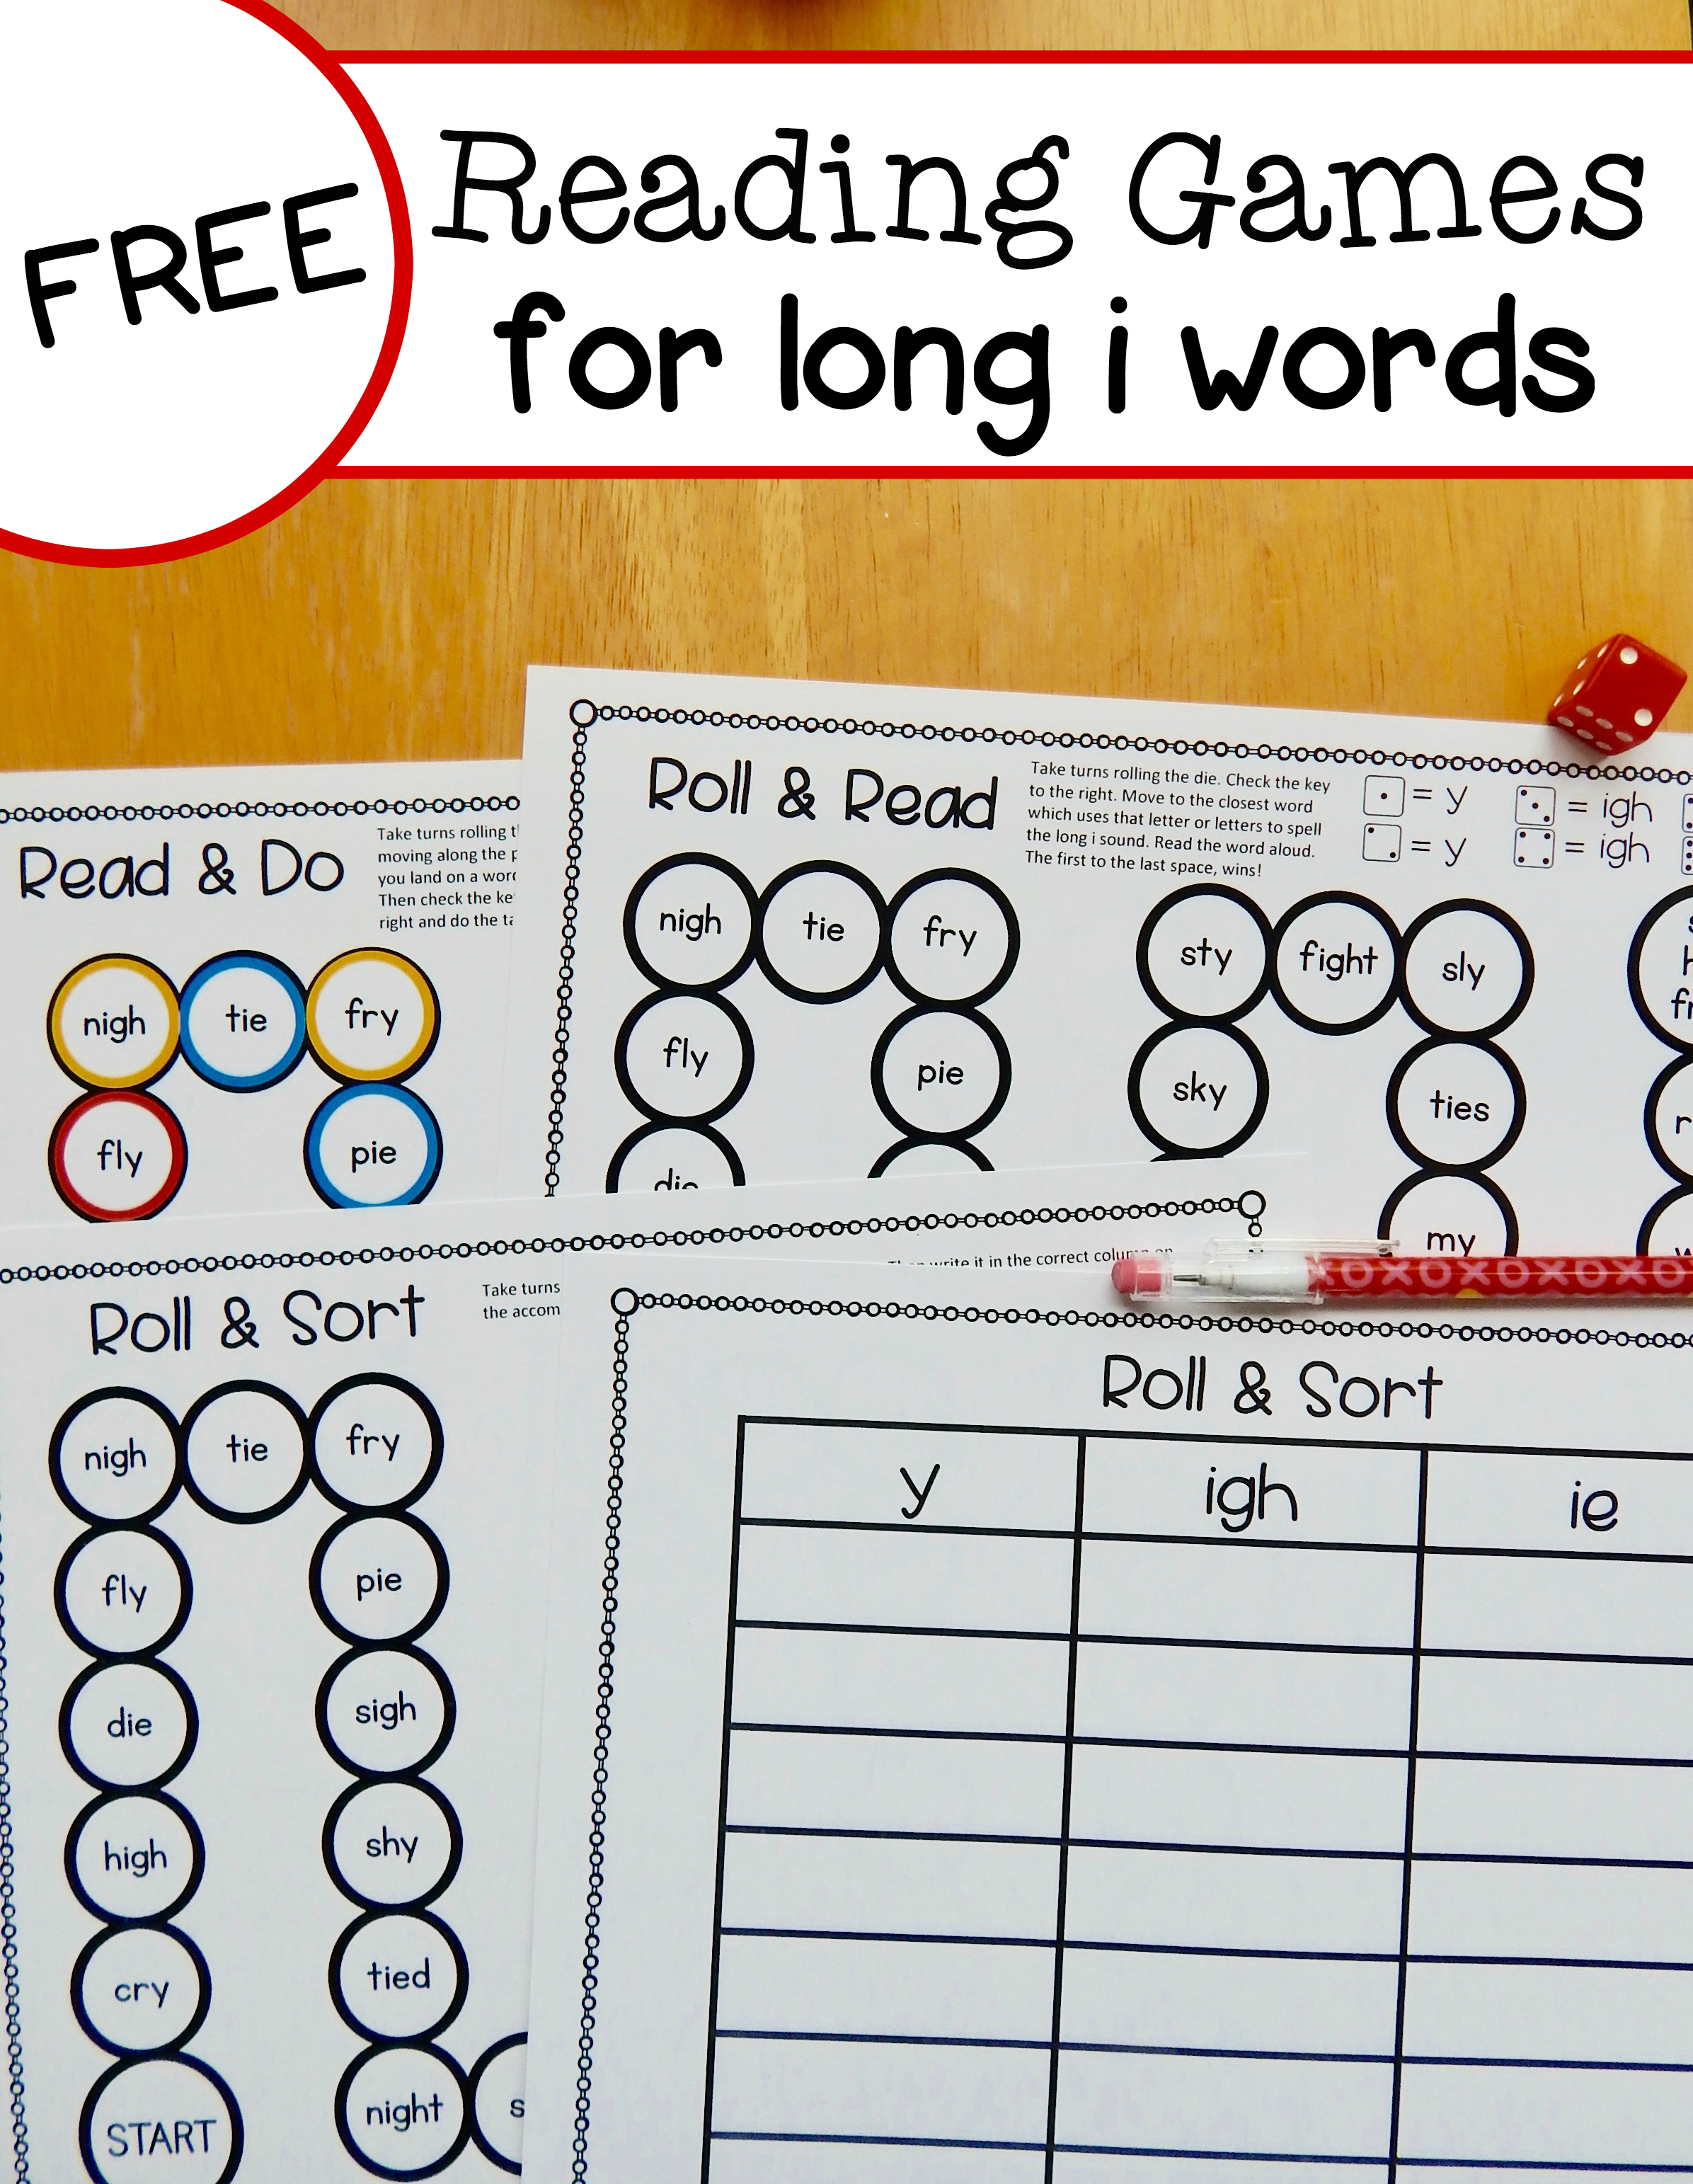 Free Long I Reading Games For Y, Ie, And Igh Words - The Measured Mom - Wilson Reading Free Printables